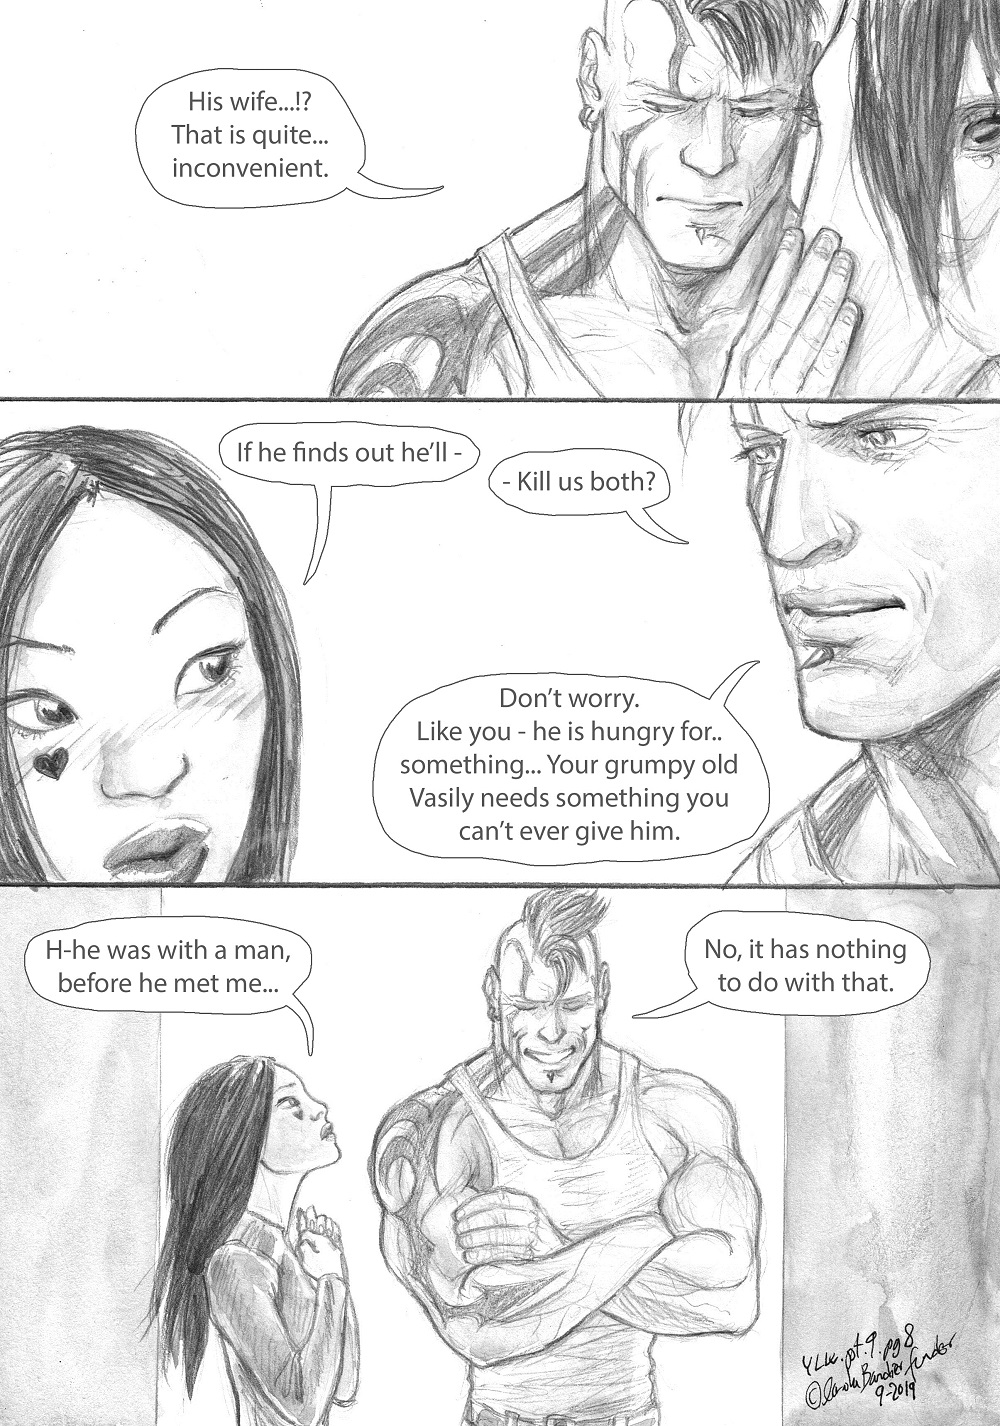 YLW_part9_A_Convenient_Coincidence_page8